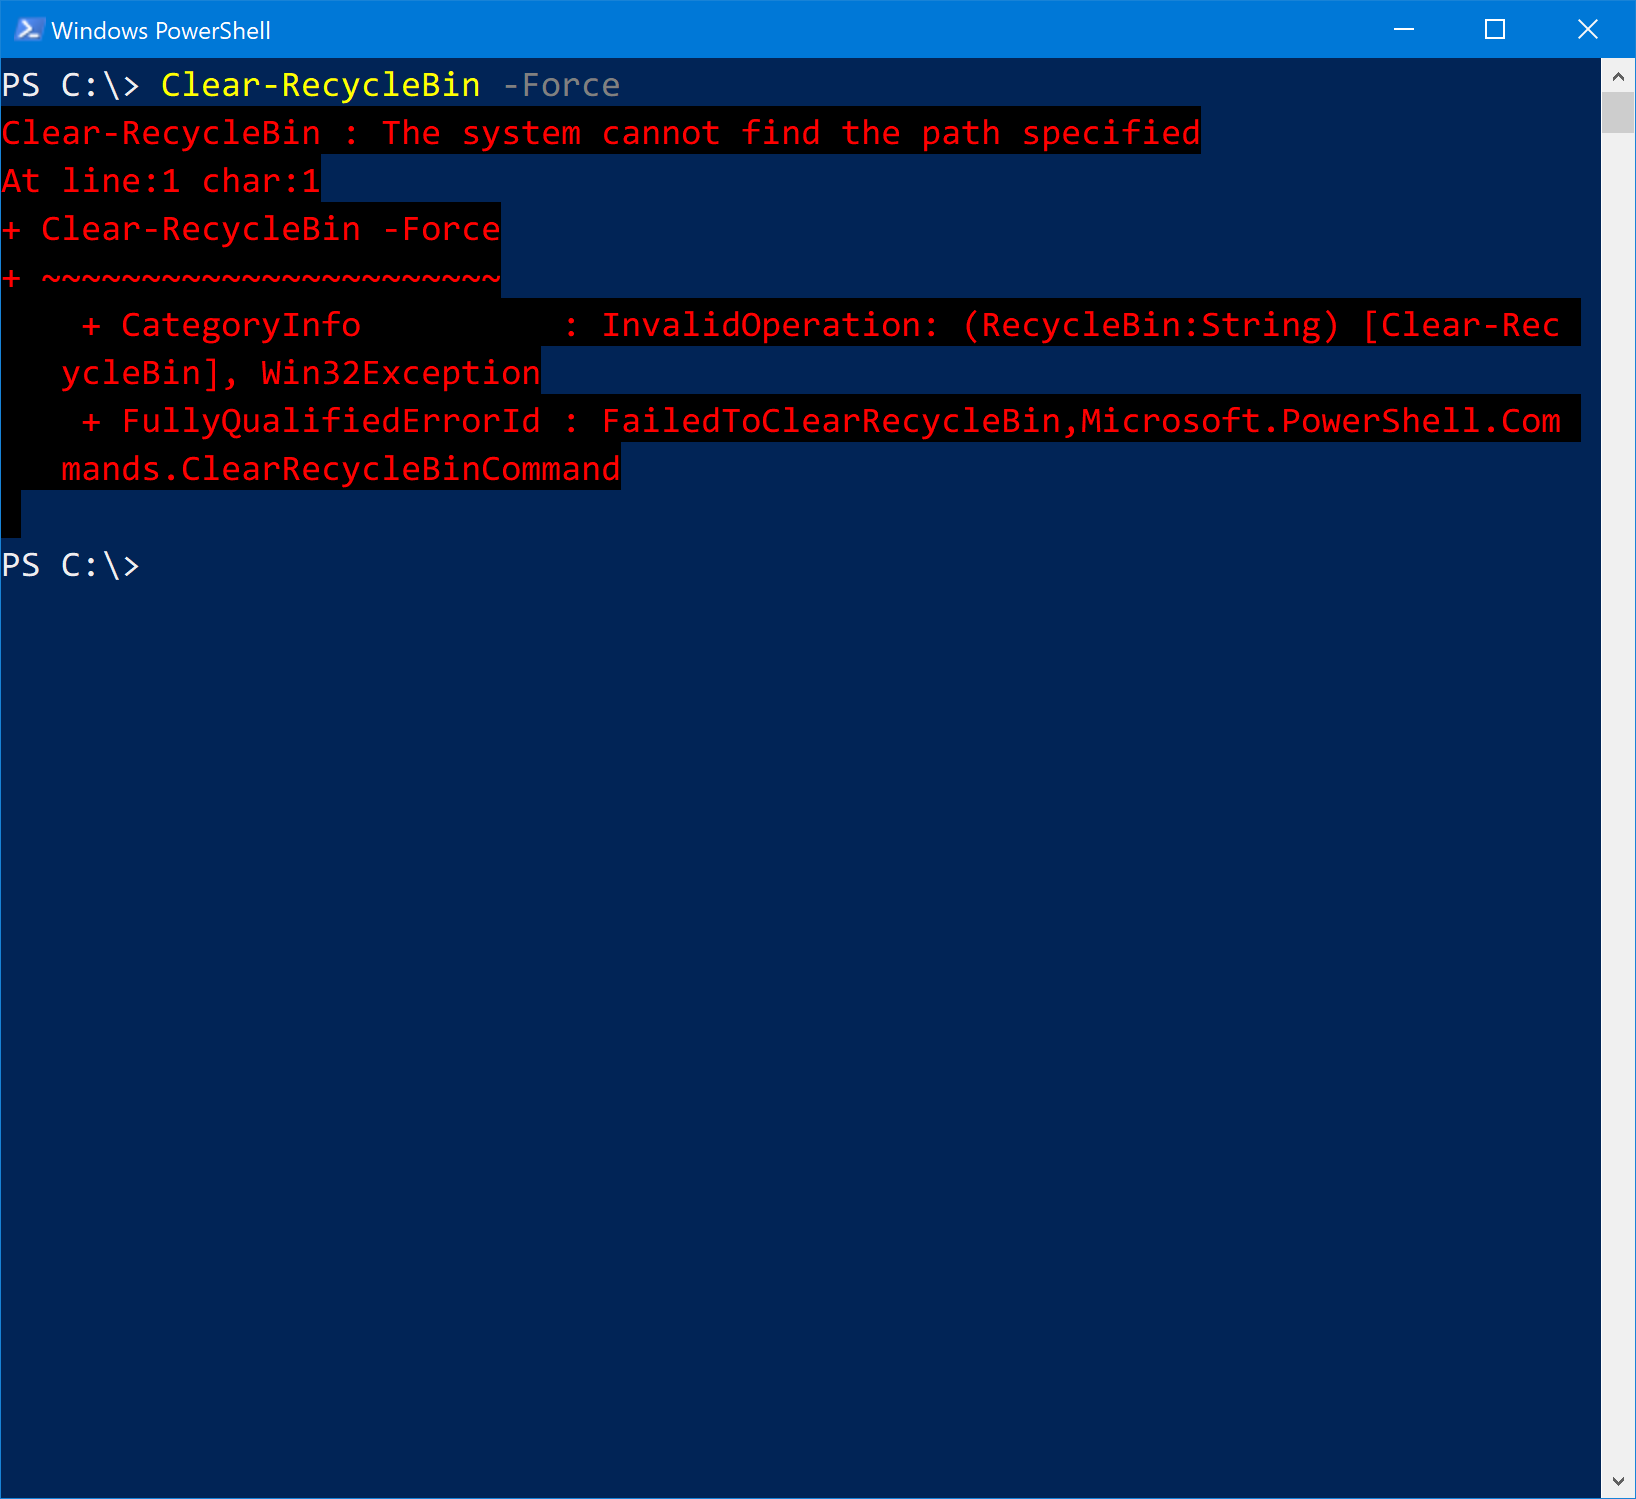 PowerShell codebase misuses SHEmptyRecycleBin function in Clear-RecycleBin cmdlet